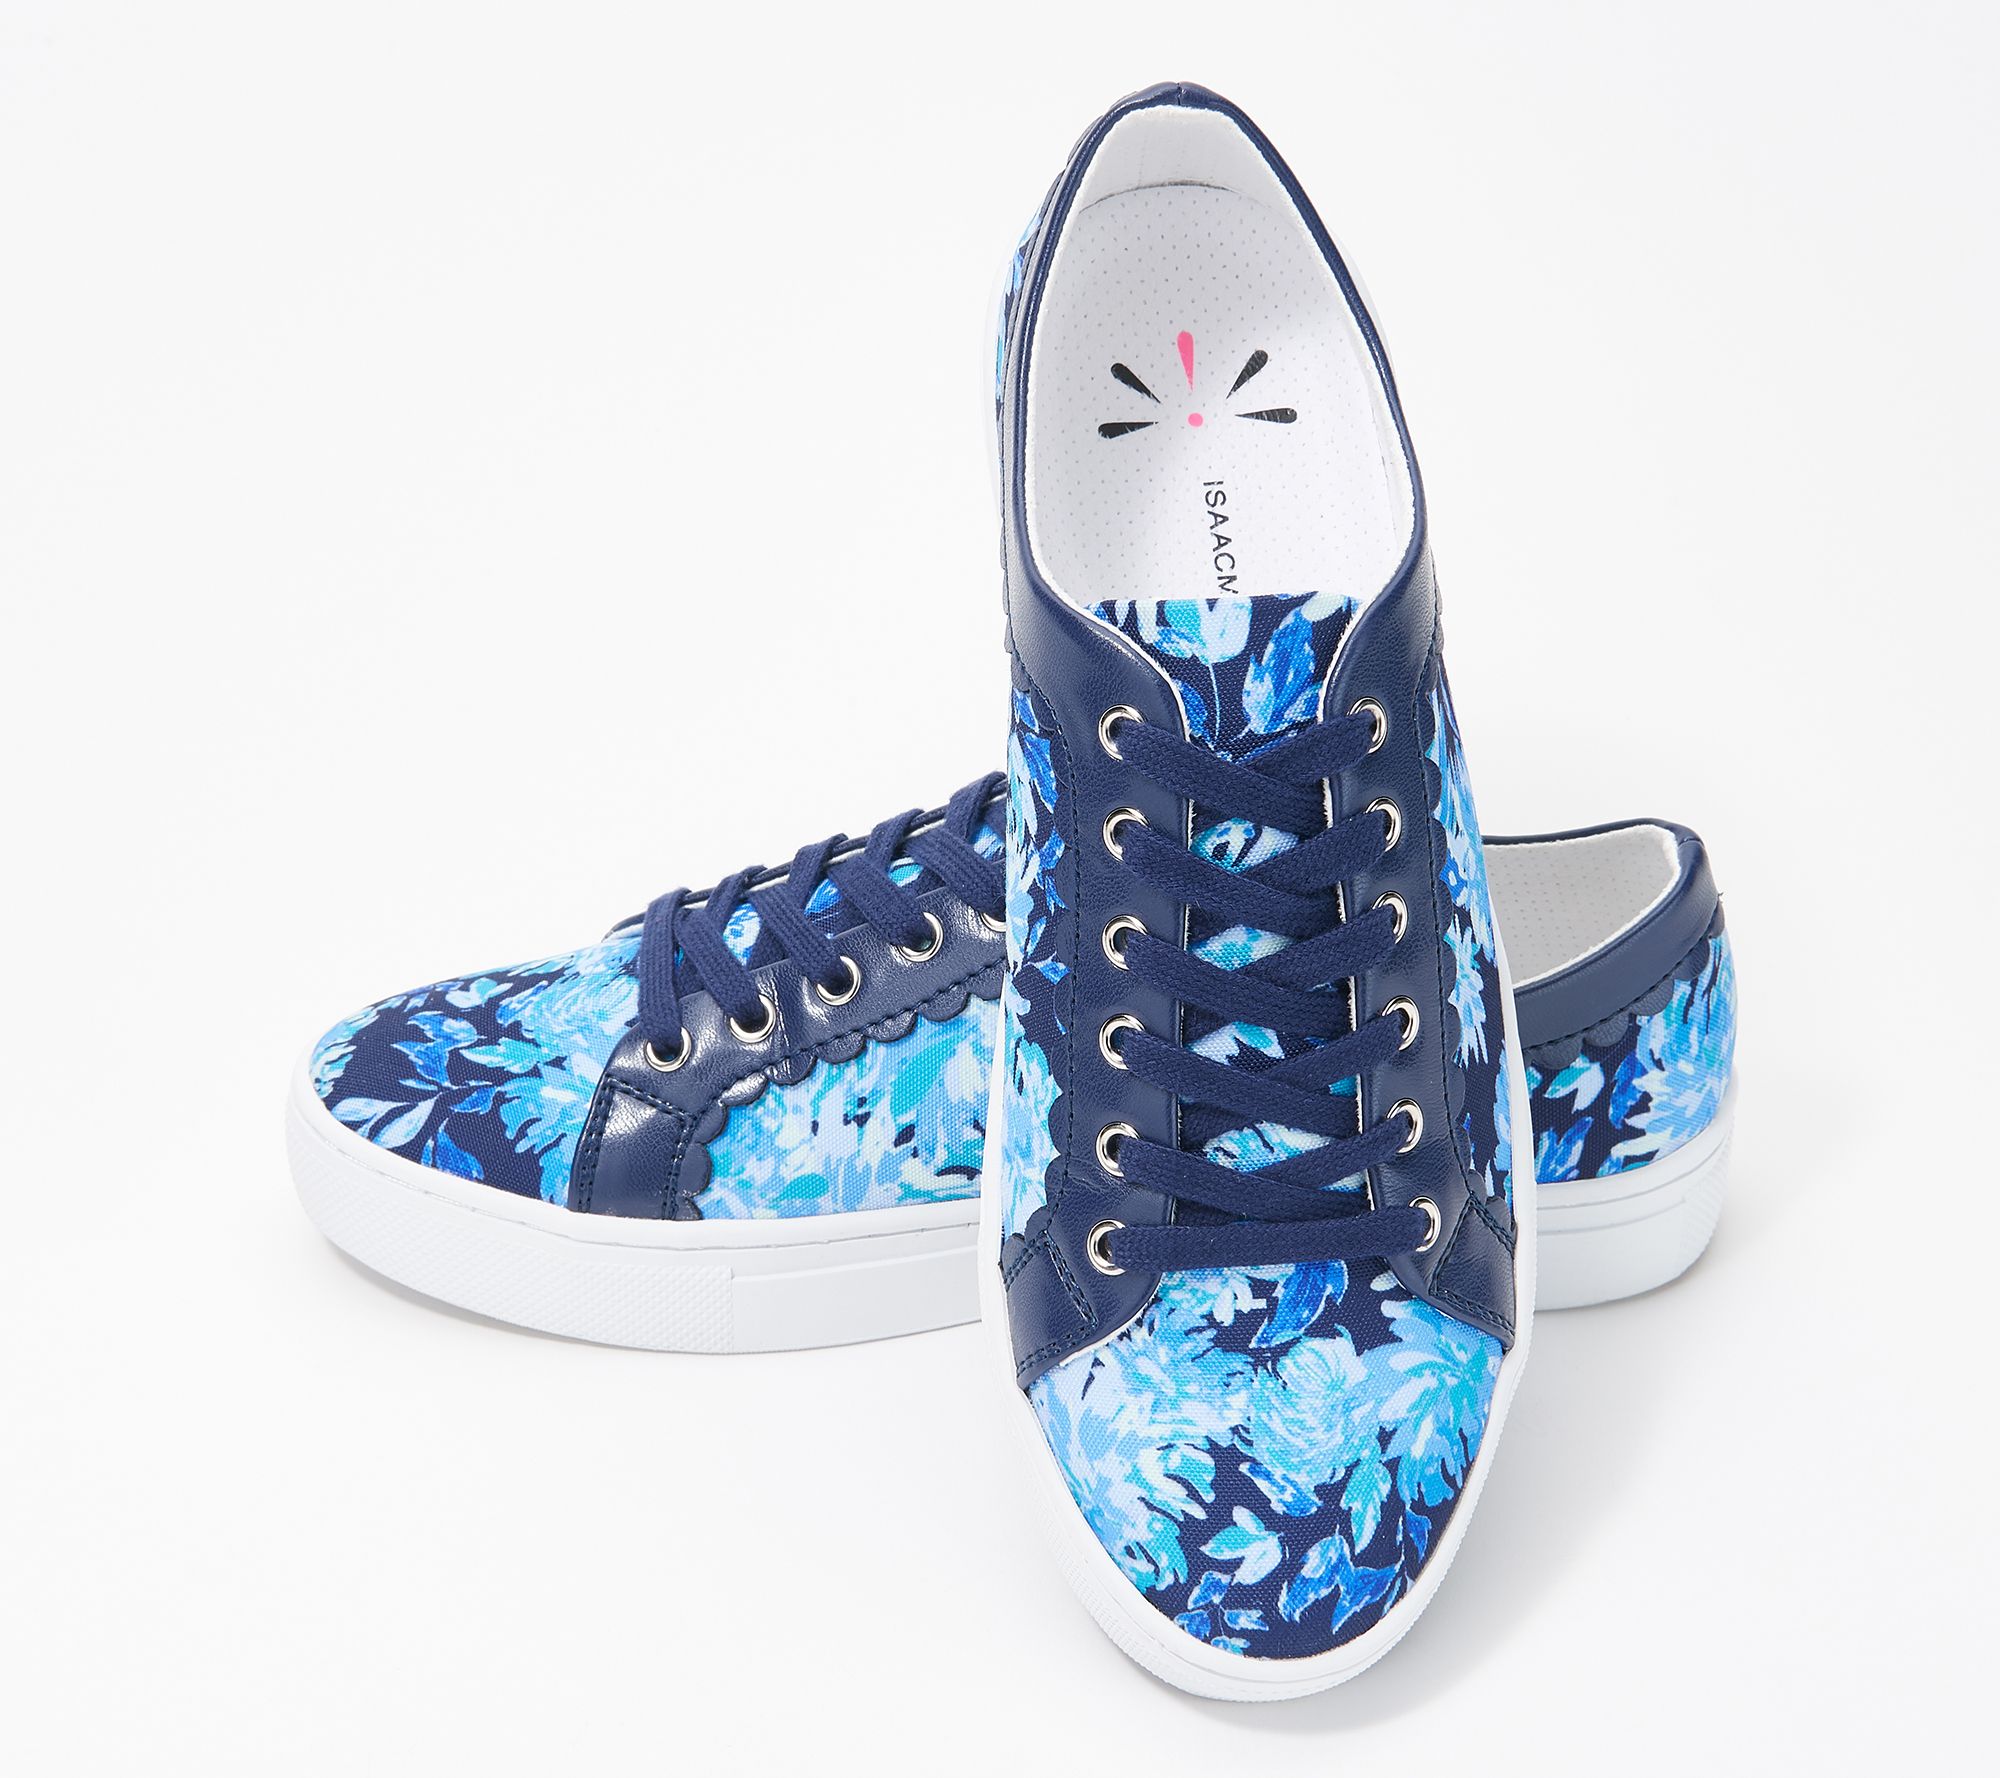 Isaac Mizrahi Live! Floral Printed Sneakers with Scallop Trim - QVC.com